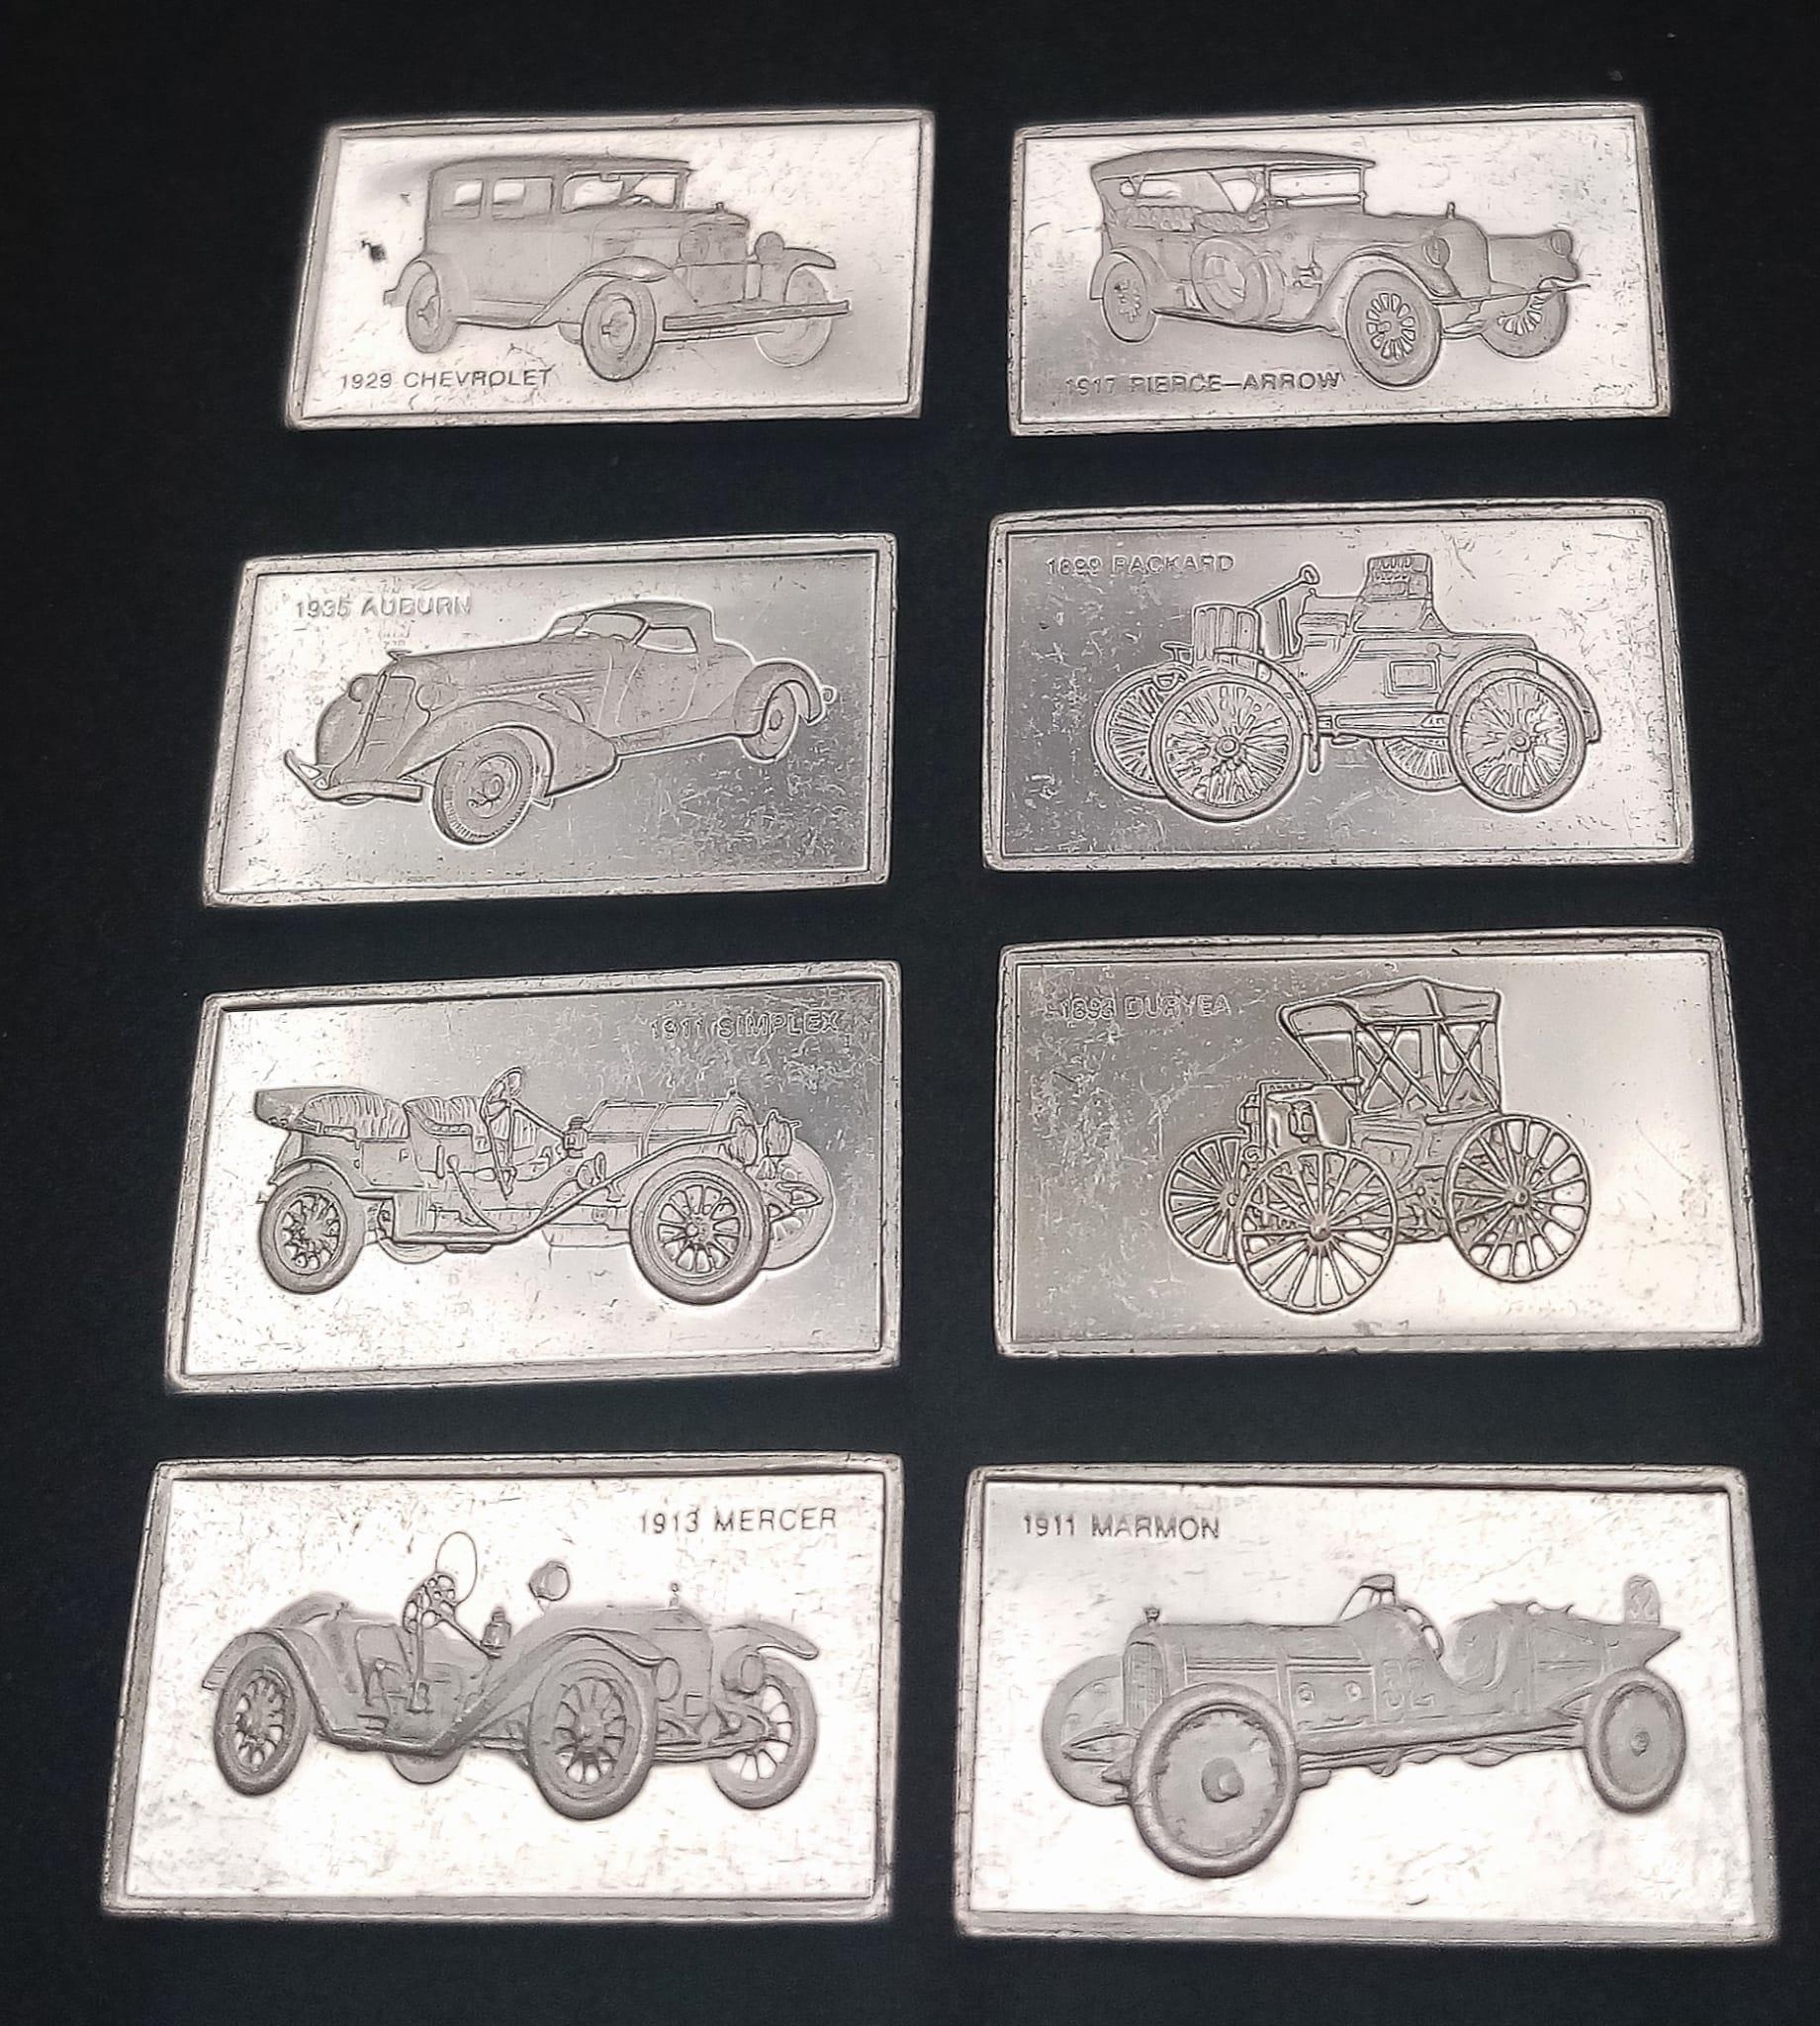 A Selection of 8 Sterling Silver American USA Car Manufacturer Plaques - Mercer, Simplex, Marmon, - Image 2 of 3